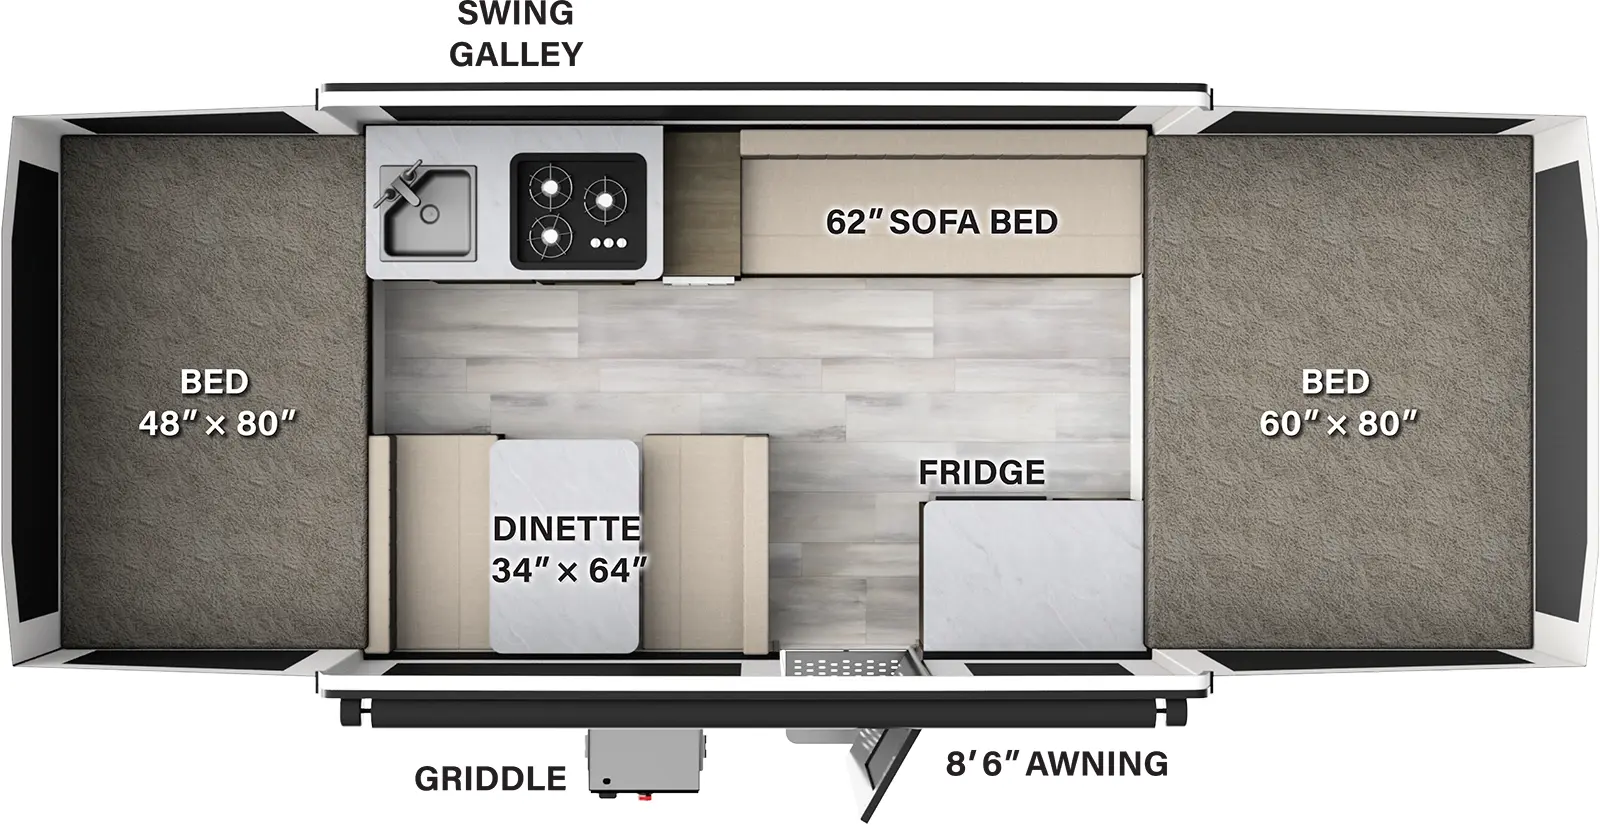 The 207SE has no slideouts and one entry door. Exterior features an 8 foot 6 inch awning and a griddle. Interior layout front to back: front tent bed; off-door side sofa bed, and swing galley with cooktop and sink; door side countertop with refrigerator, entry, and dinette; rear tent bed.